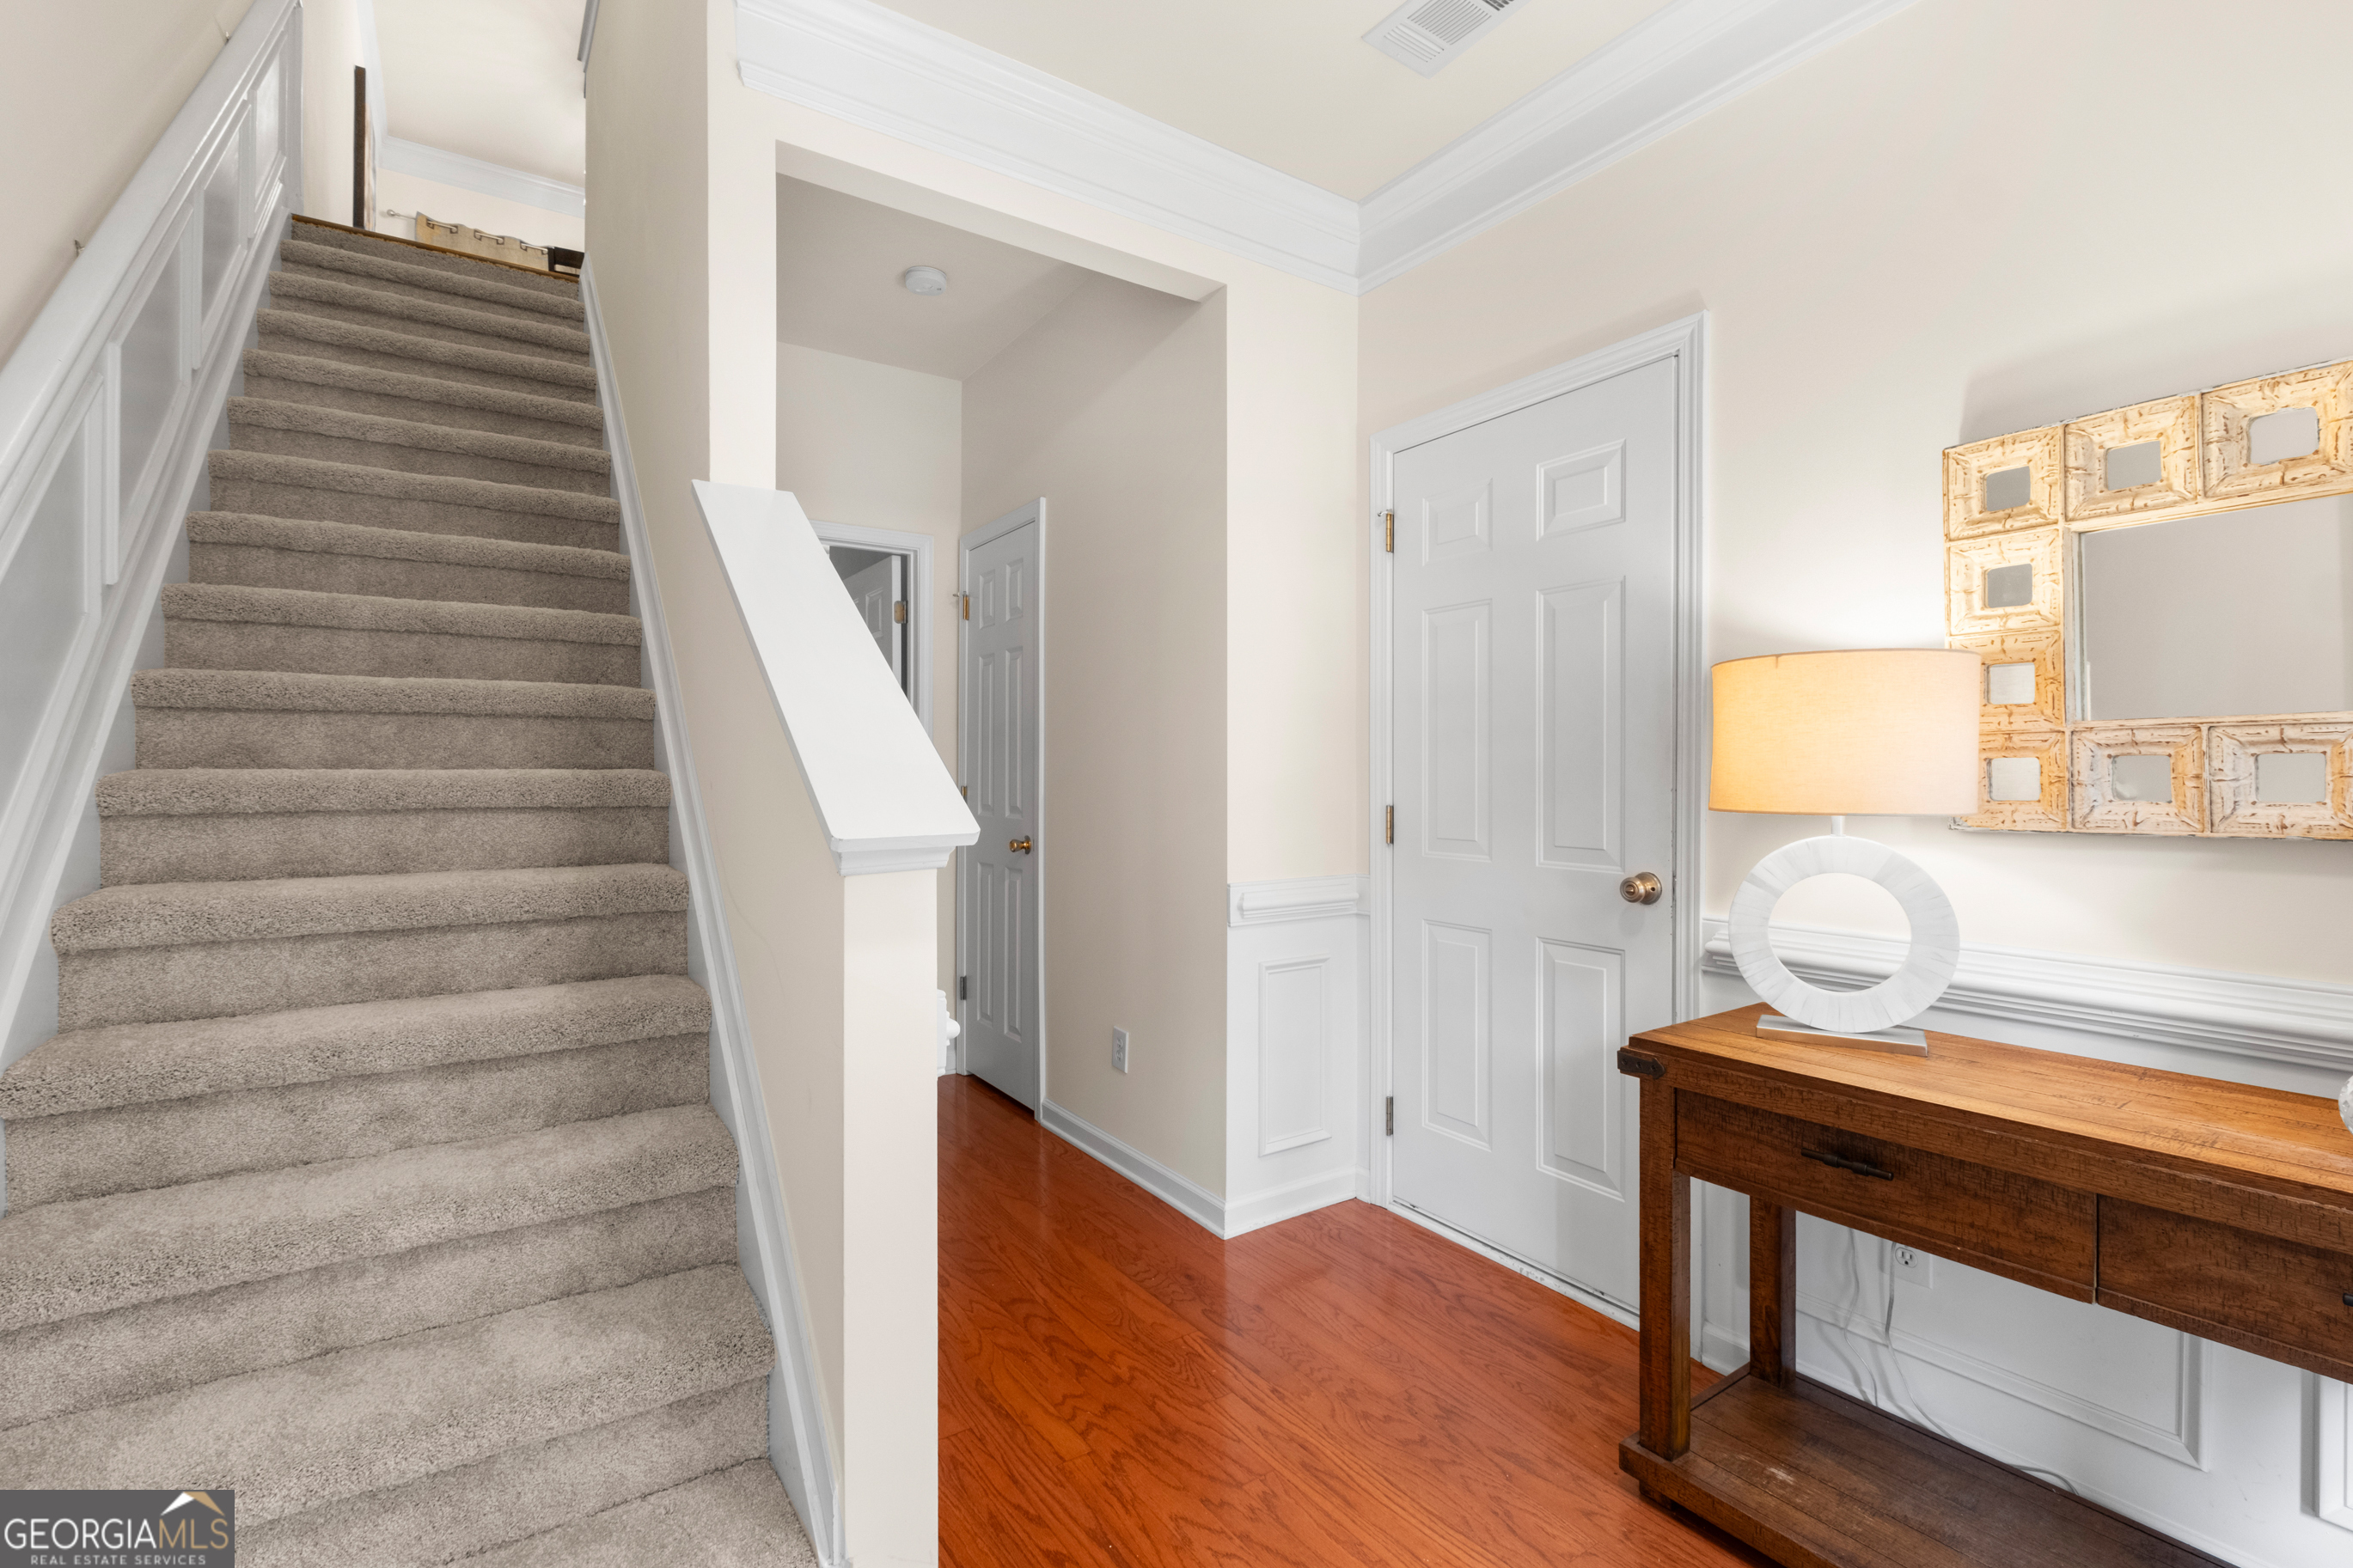 Photo 6 of 40 of 647 Bernay WAY townhome